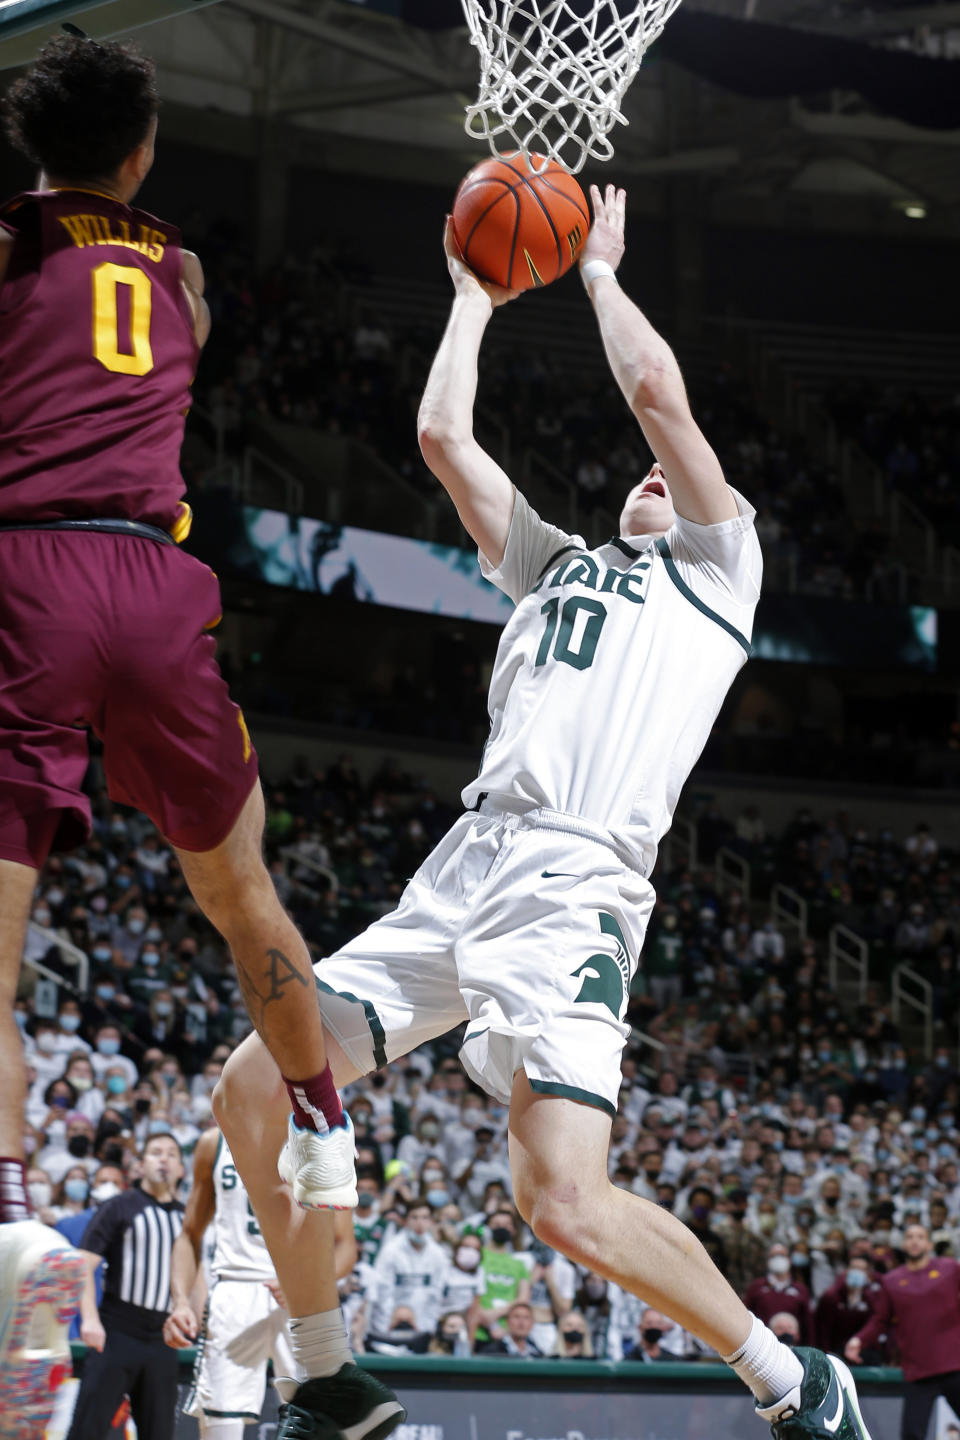 Michigan State's Joey Hauser, right, puts up the game-winning shot against Minnesota's Payton Willis (0) late in the second half of an NCAA college basketball game, Wednesday, Jan. 12, 2022, in East Lansing, Mich. Michigan State won 71-69. (AP Photo/Al Goldis)